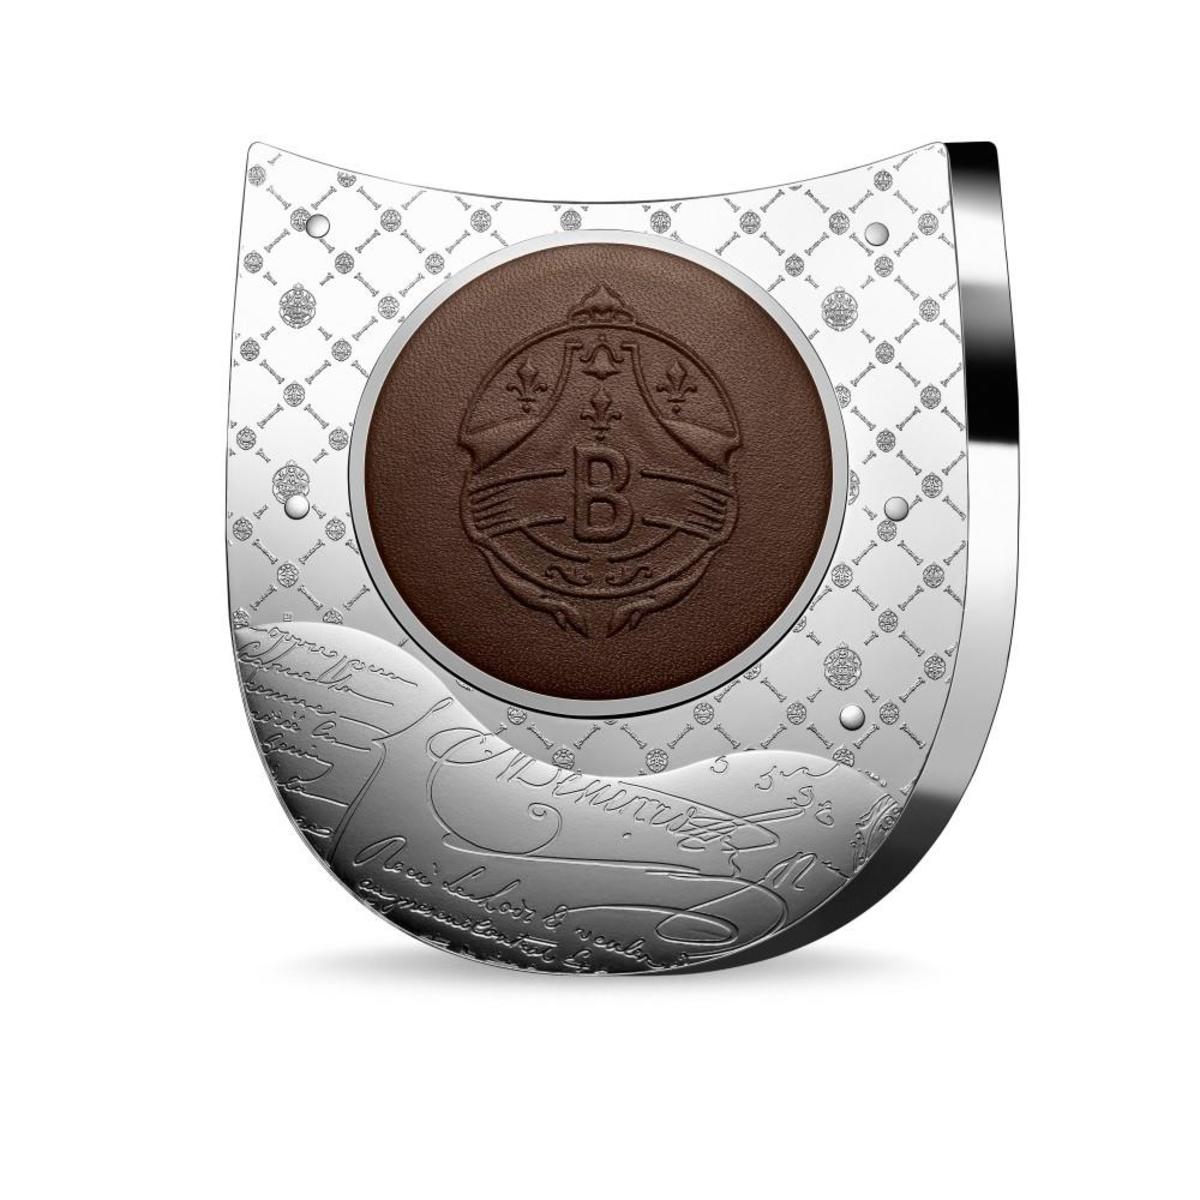 The reverse of the 500 Euro silver kilo Berluti coin features a patinated leather circle with the company emblem. The leather piece is crimped and embossed during the striking of the coin.